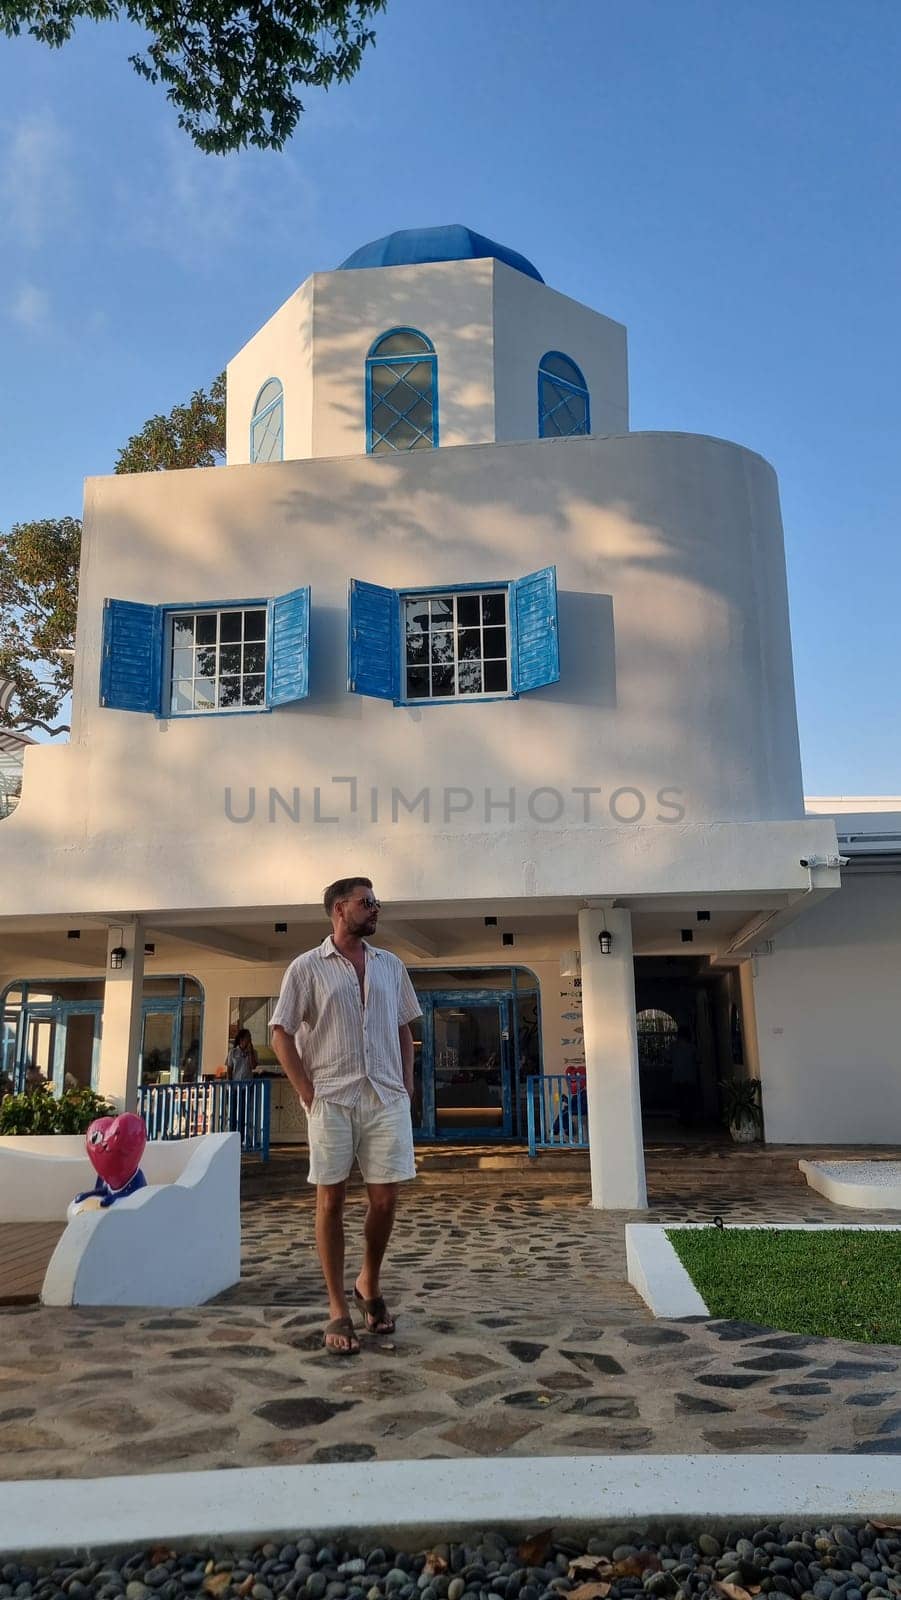 A man in casual attire stands confidently in front of a majestic white building, the sunlight casting a warm glow over the scene by fokkebok